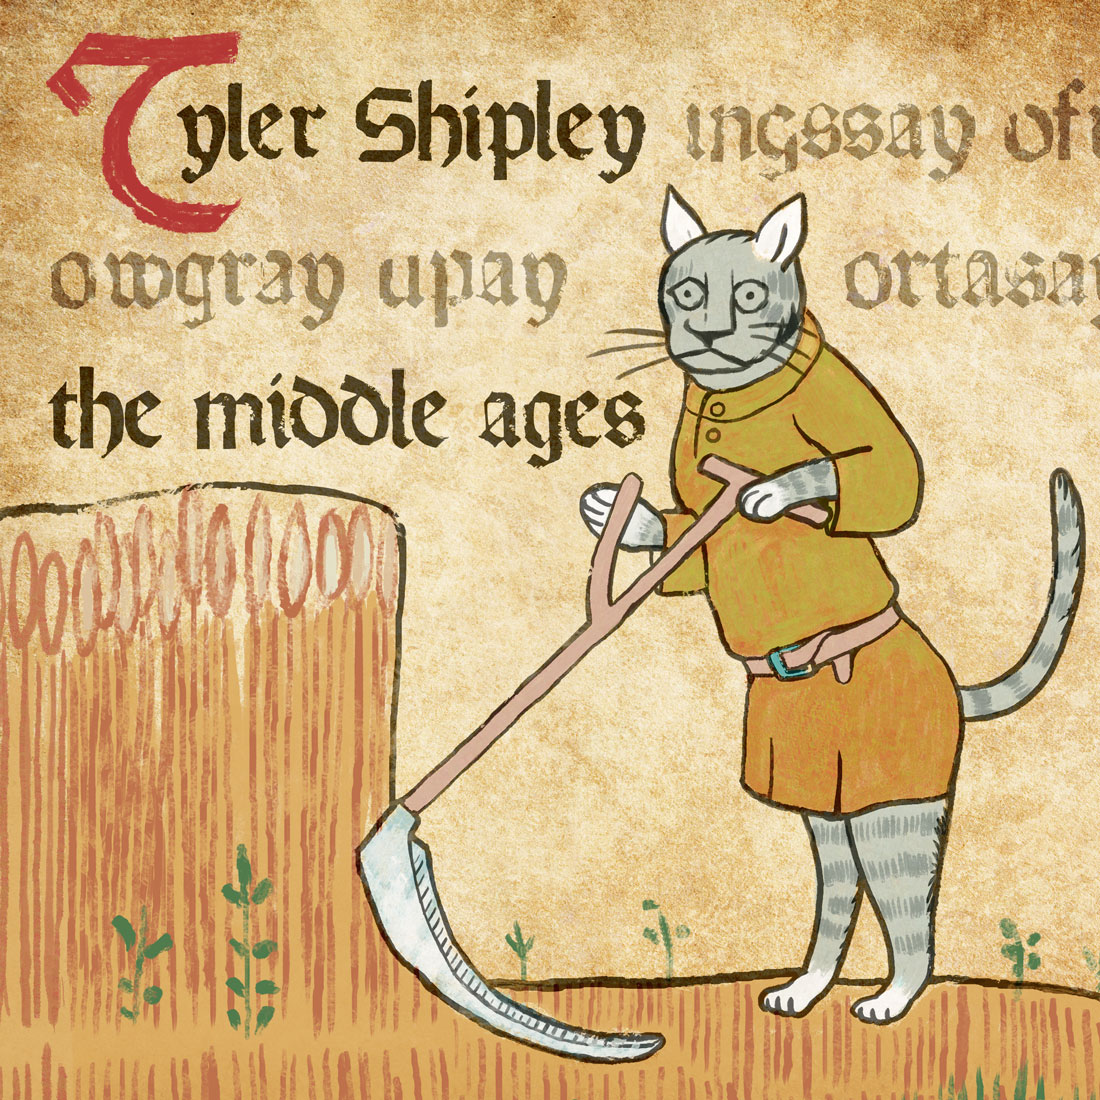 Medieval cat on the cover on the cover of a record album